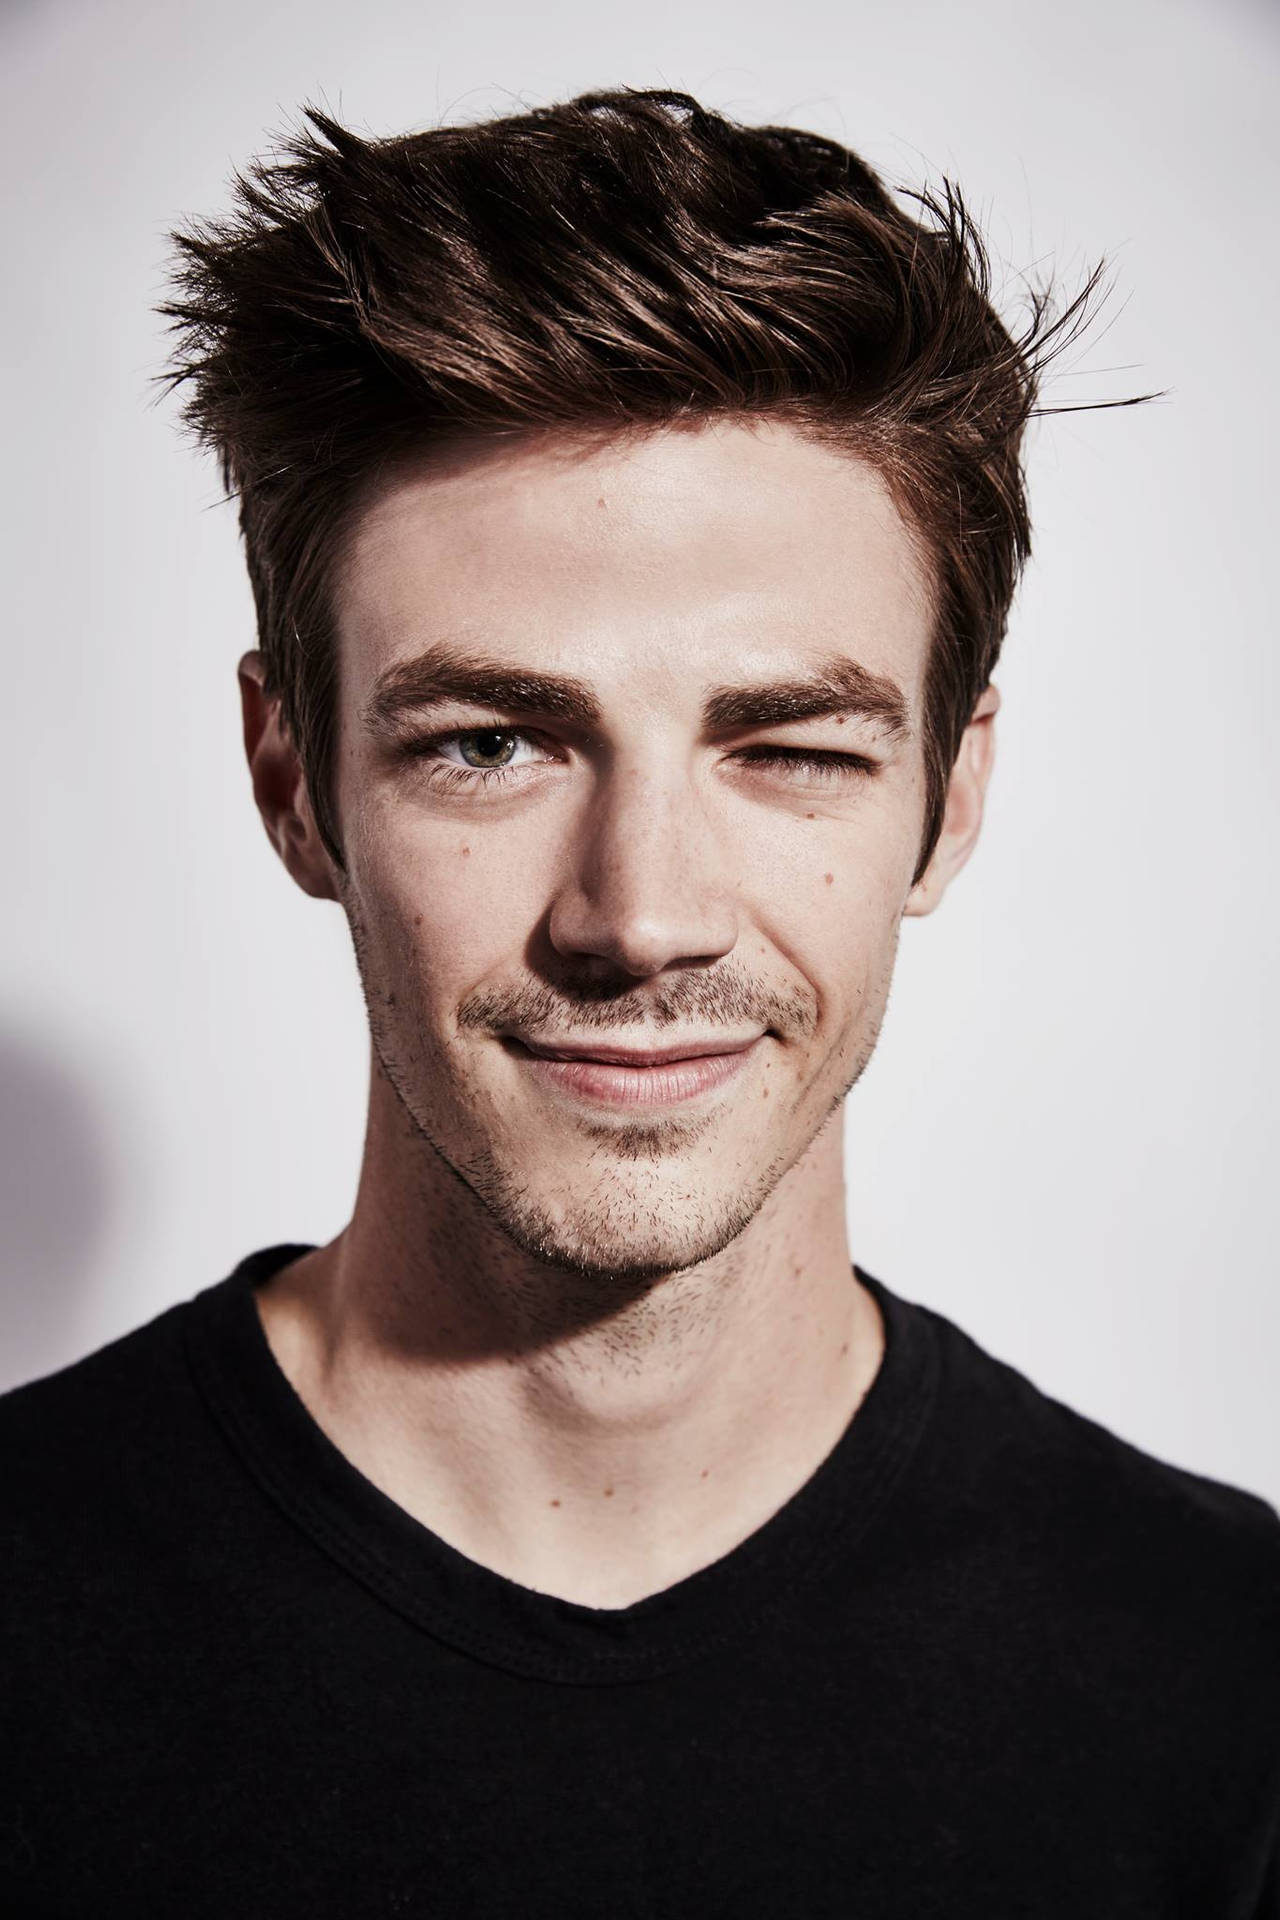 Grant Gustin Quirky Portrait Background